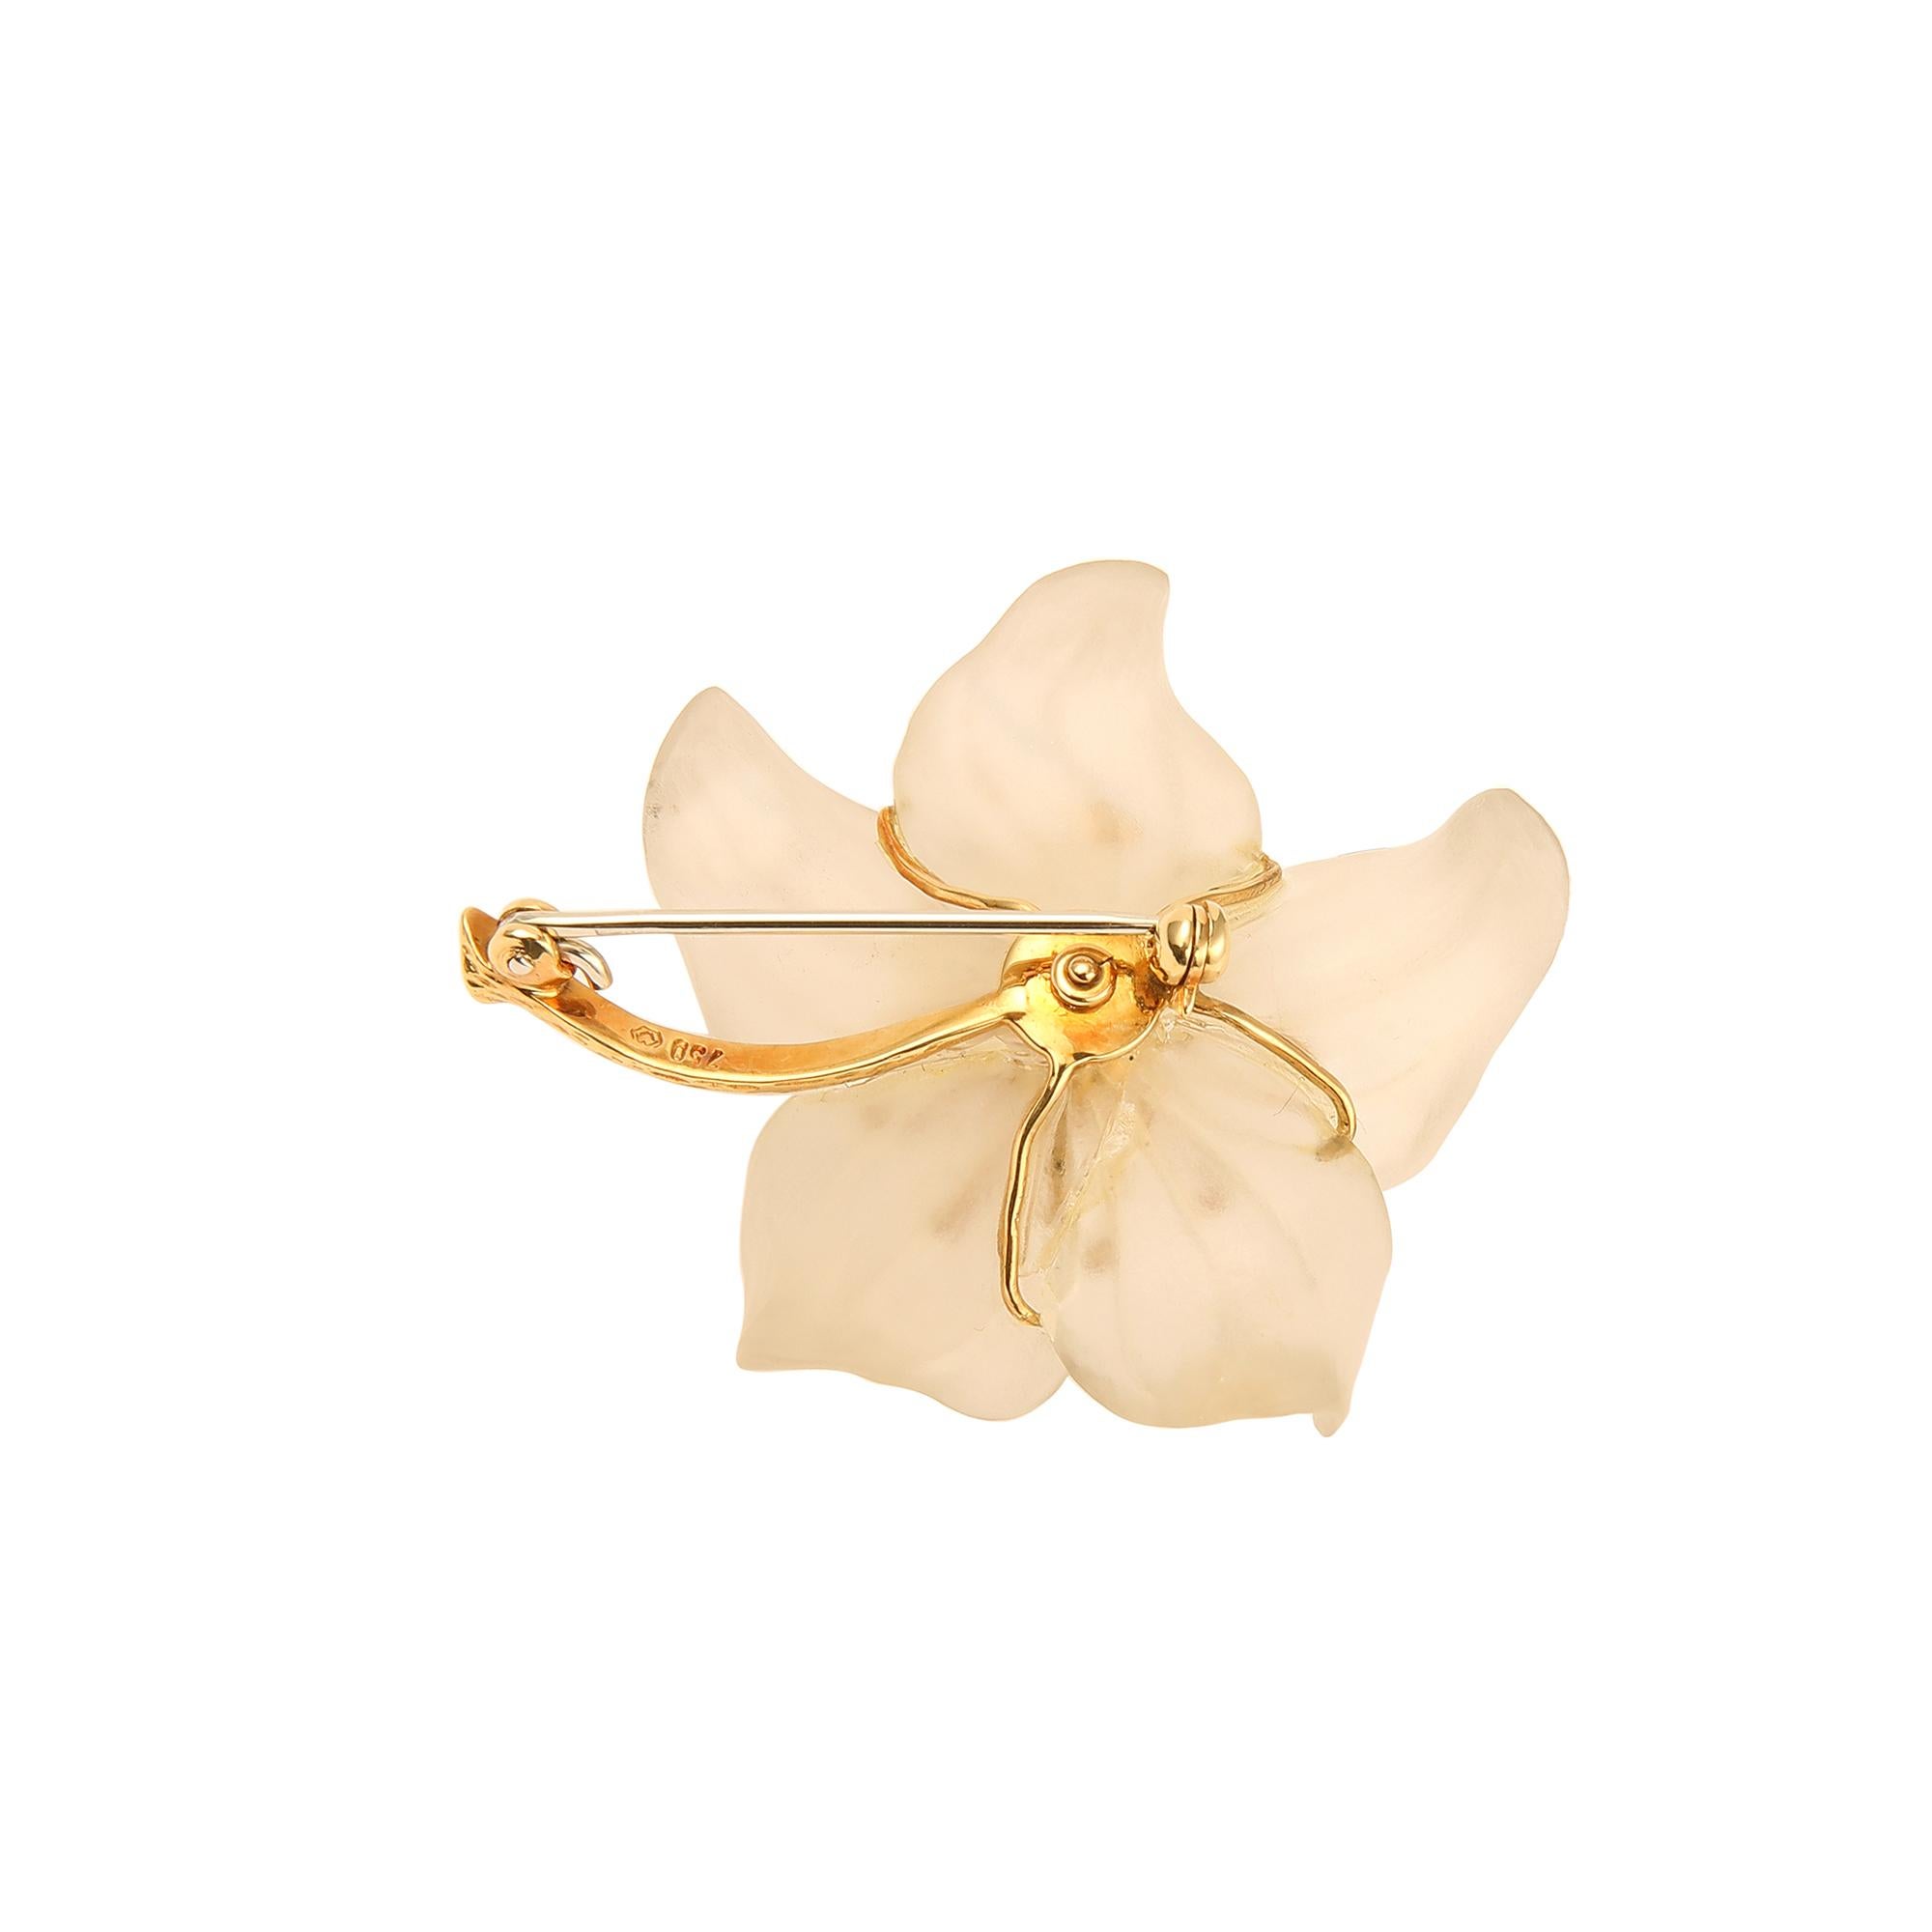 Delicate brooch in yellow gold and rock crystal representing a lily whose pistil is set with diamonds.

Total weight of diamonds : 0.06 carats

Brooch size : 47.99 x 37.81 x 11.65 mm (1.888 x 1.488 x 0.459 inch)

18 karat yellow gold,